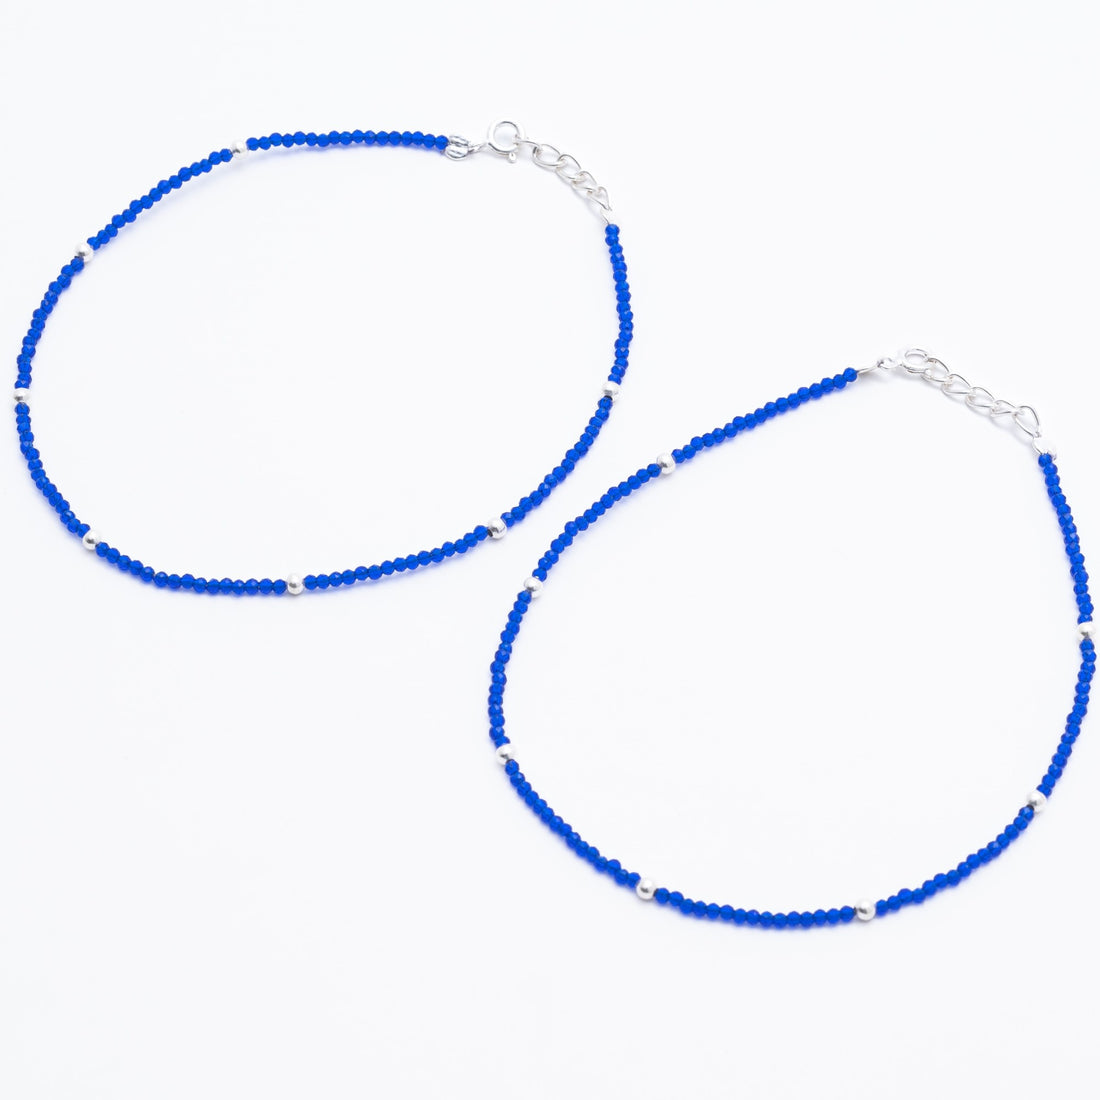 Real Blue Beads Silver Anklets for Women